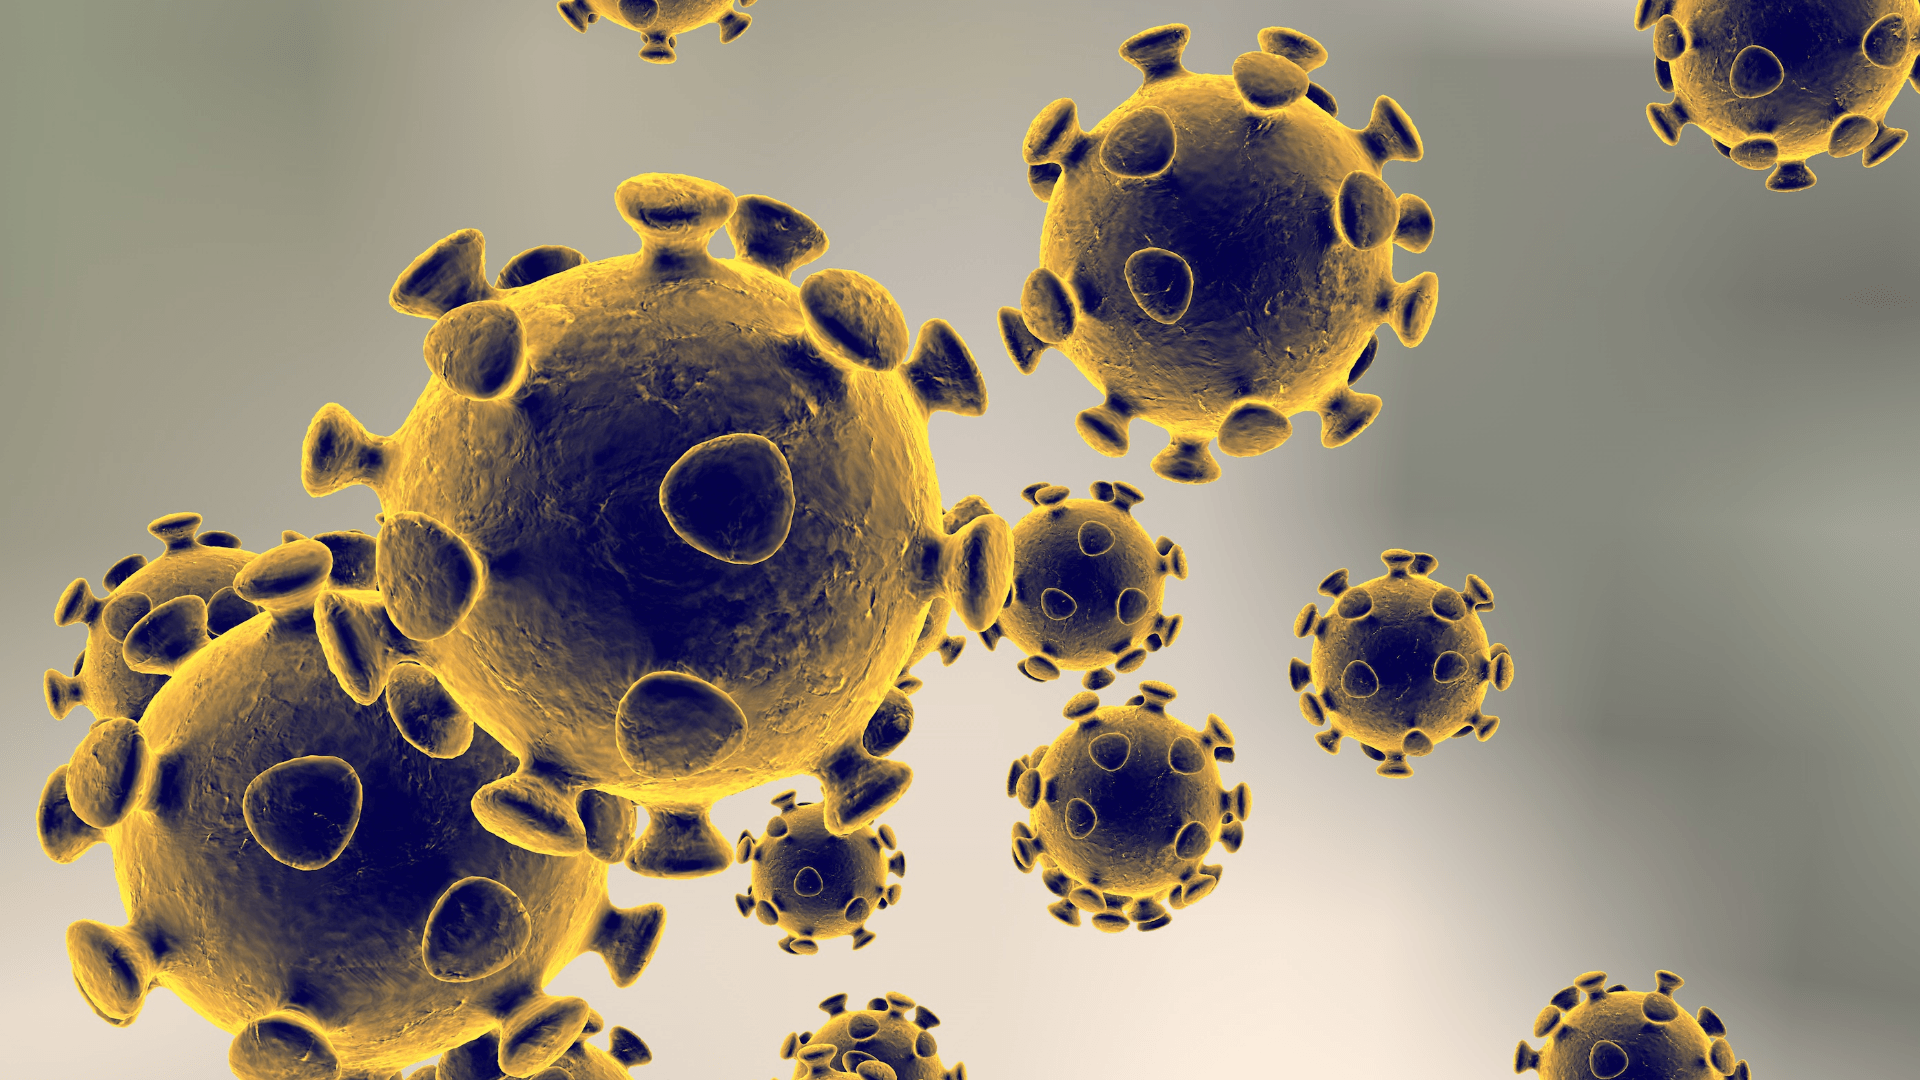 Baylor student being tested for possible case of Coronavirus. Virus Wallpaper